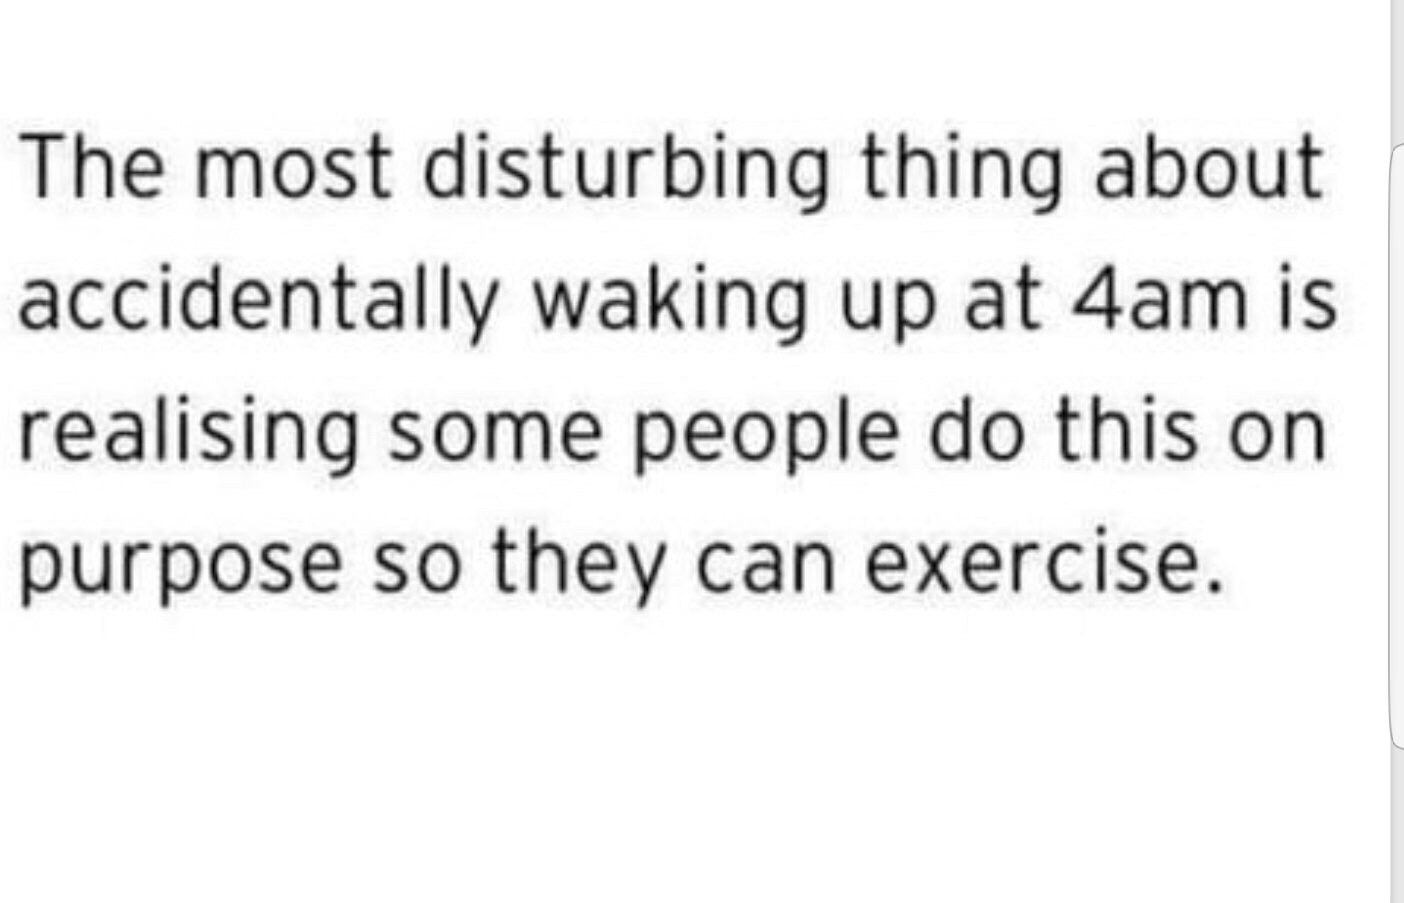 The most disturbing thing about accidentally waking up at 4am is realising some people do this on purpose so they can exercise.